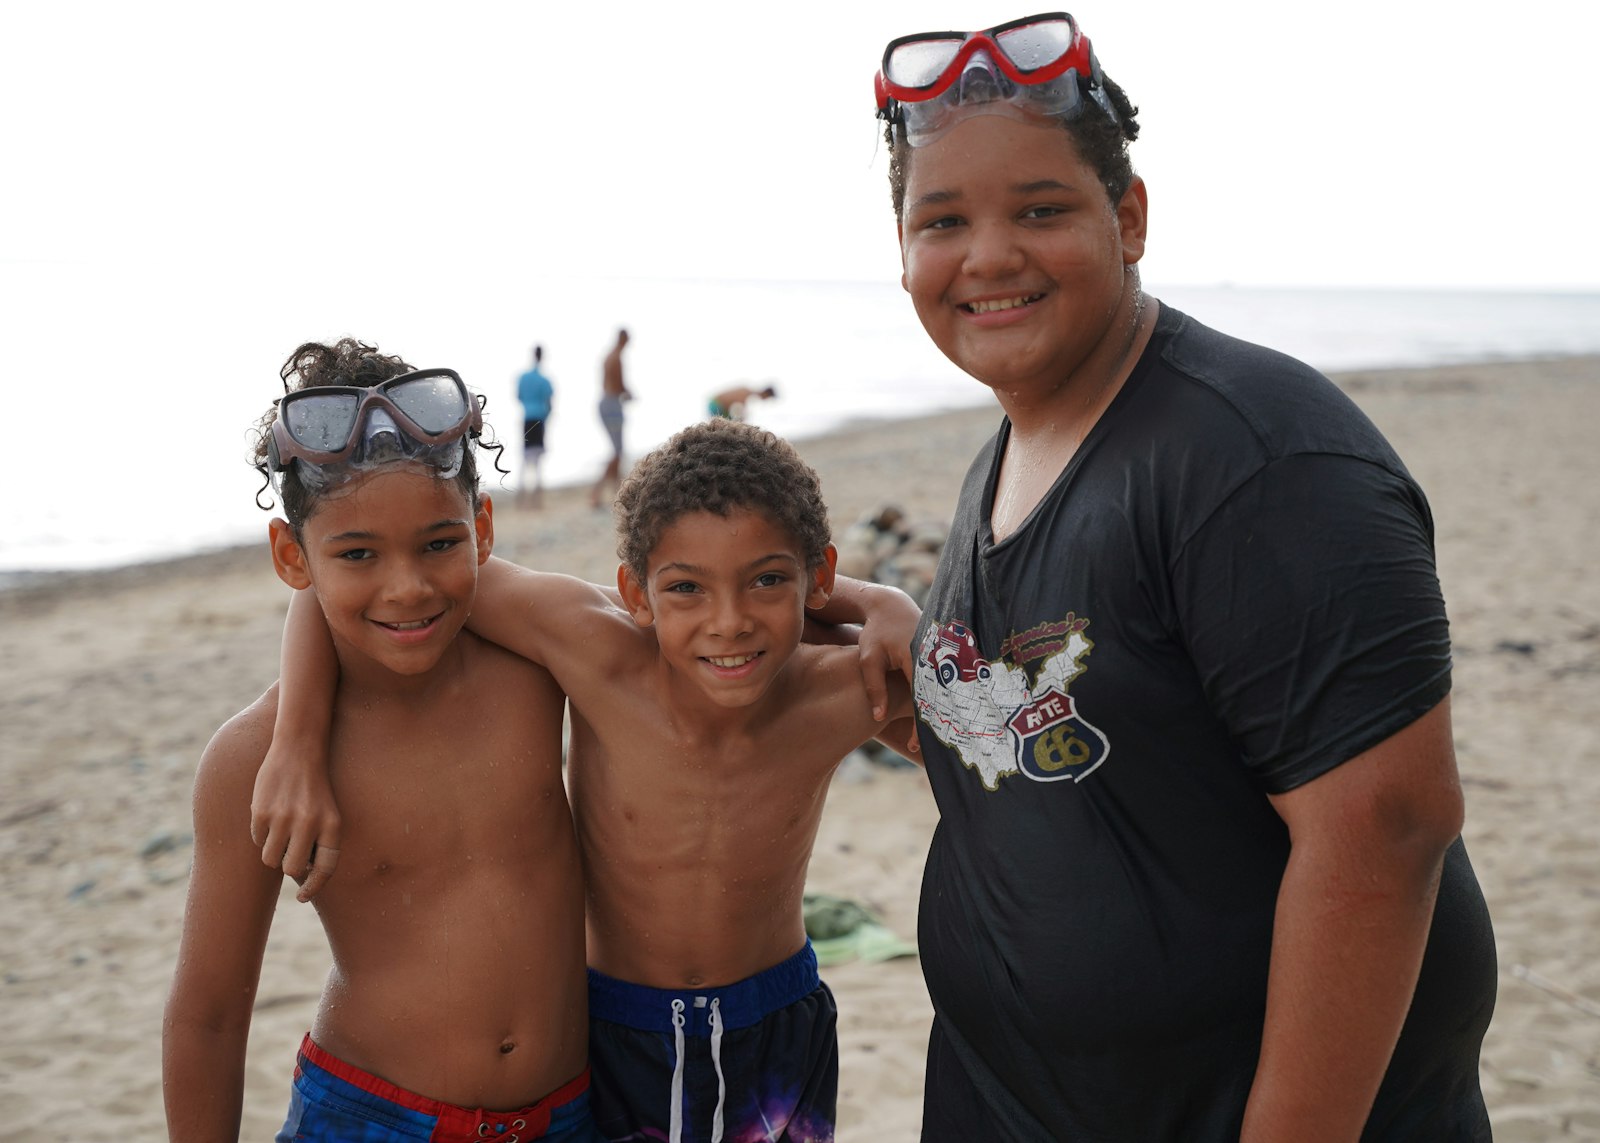 Siblings enjoy a day at the beach, their second week of the summer spent at Camp Ozanam. The youths said they have attended Camp Ozanam in past years and look forward to the excursion each summer.